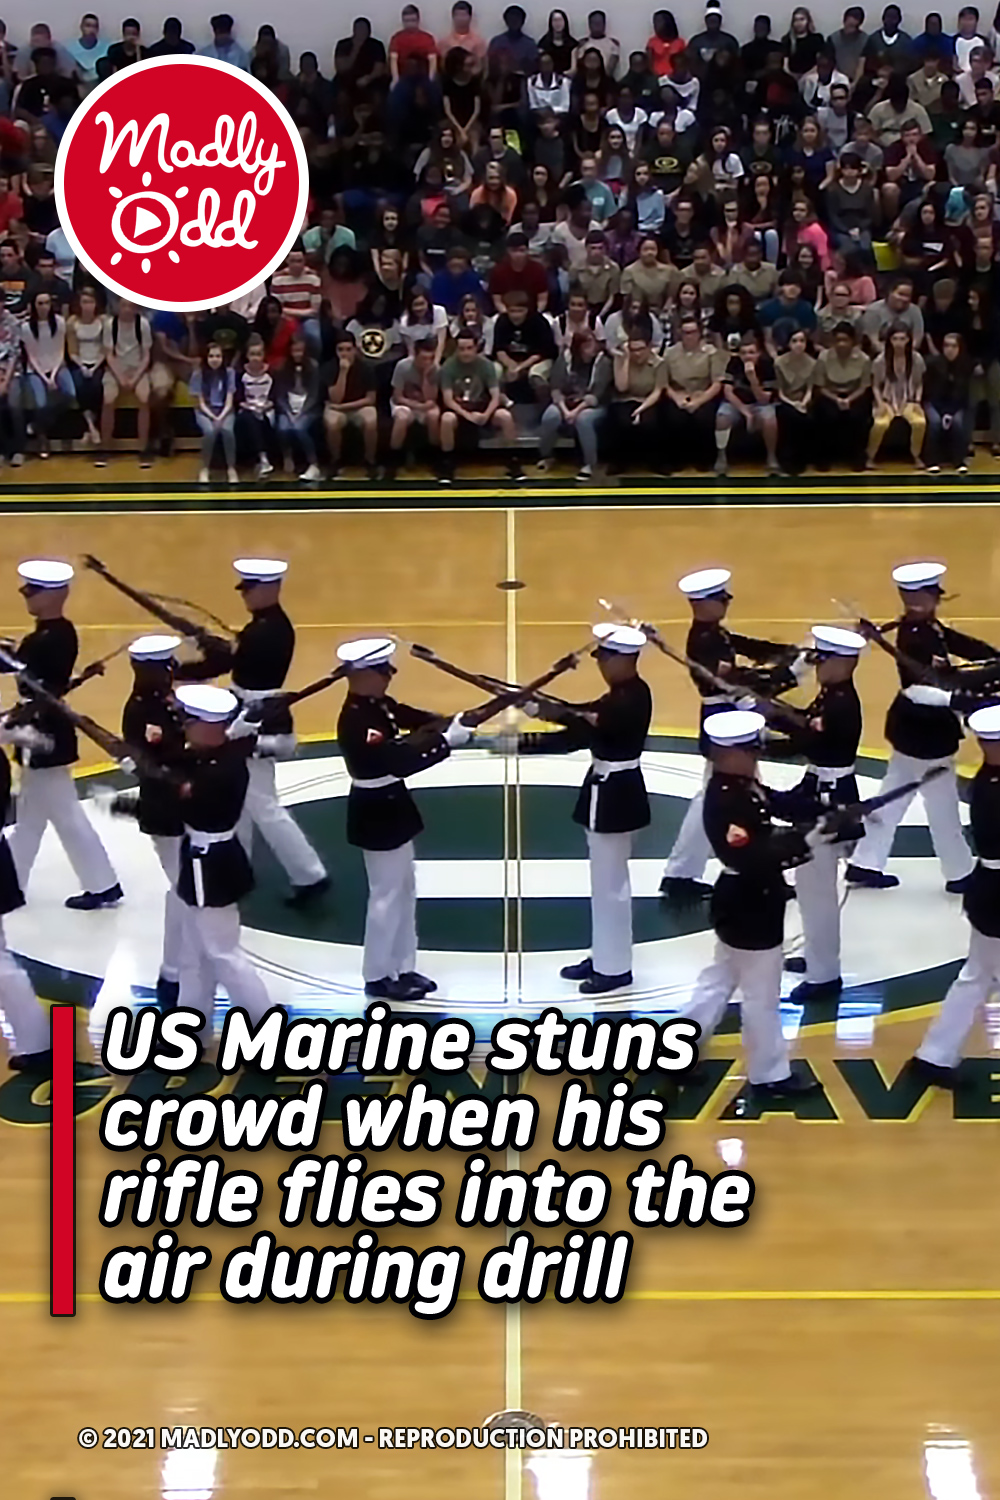 US Marine stuns crowd when his rifle flies into the air during drill